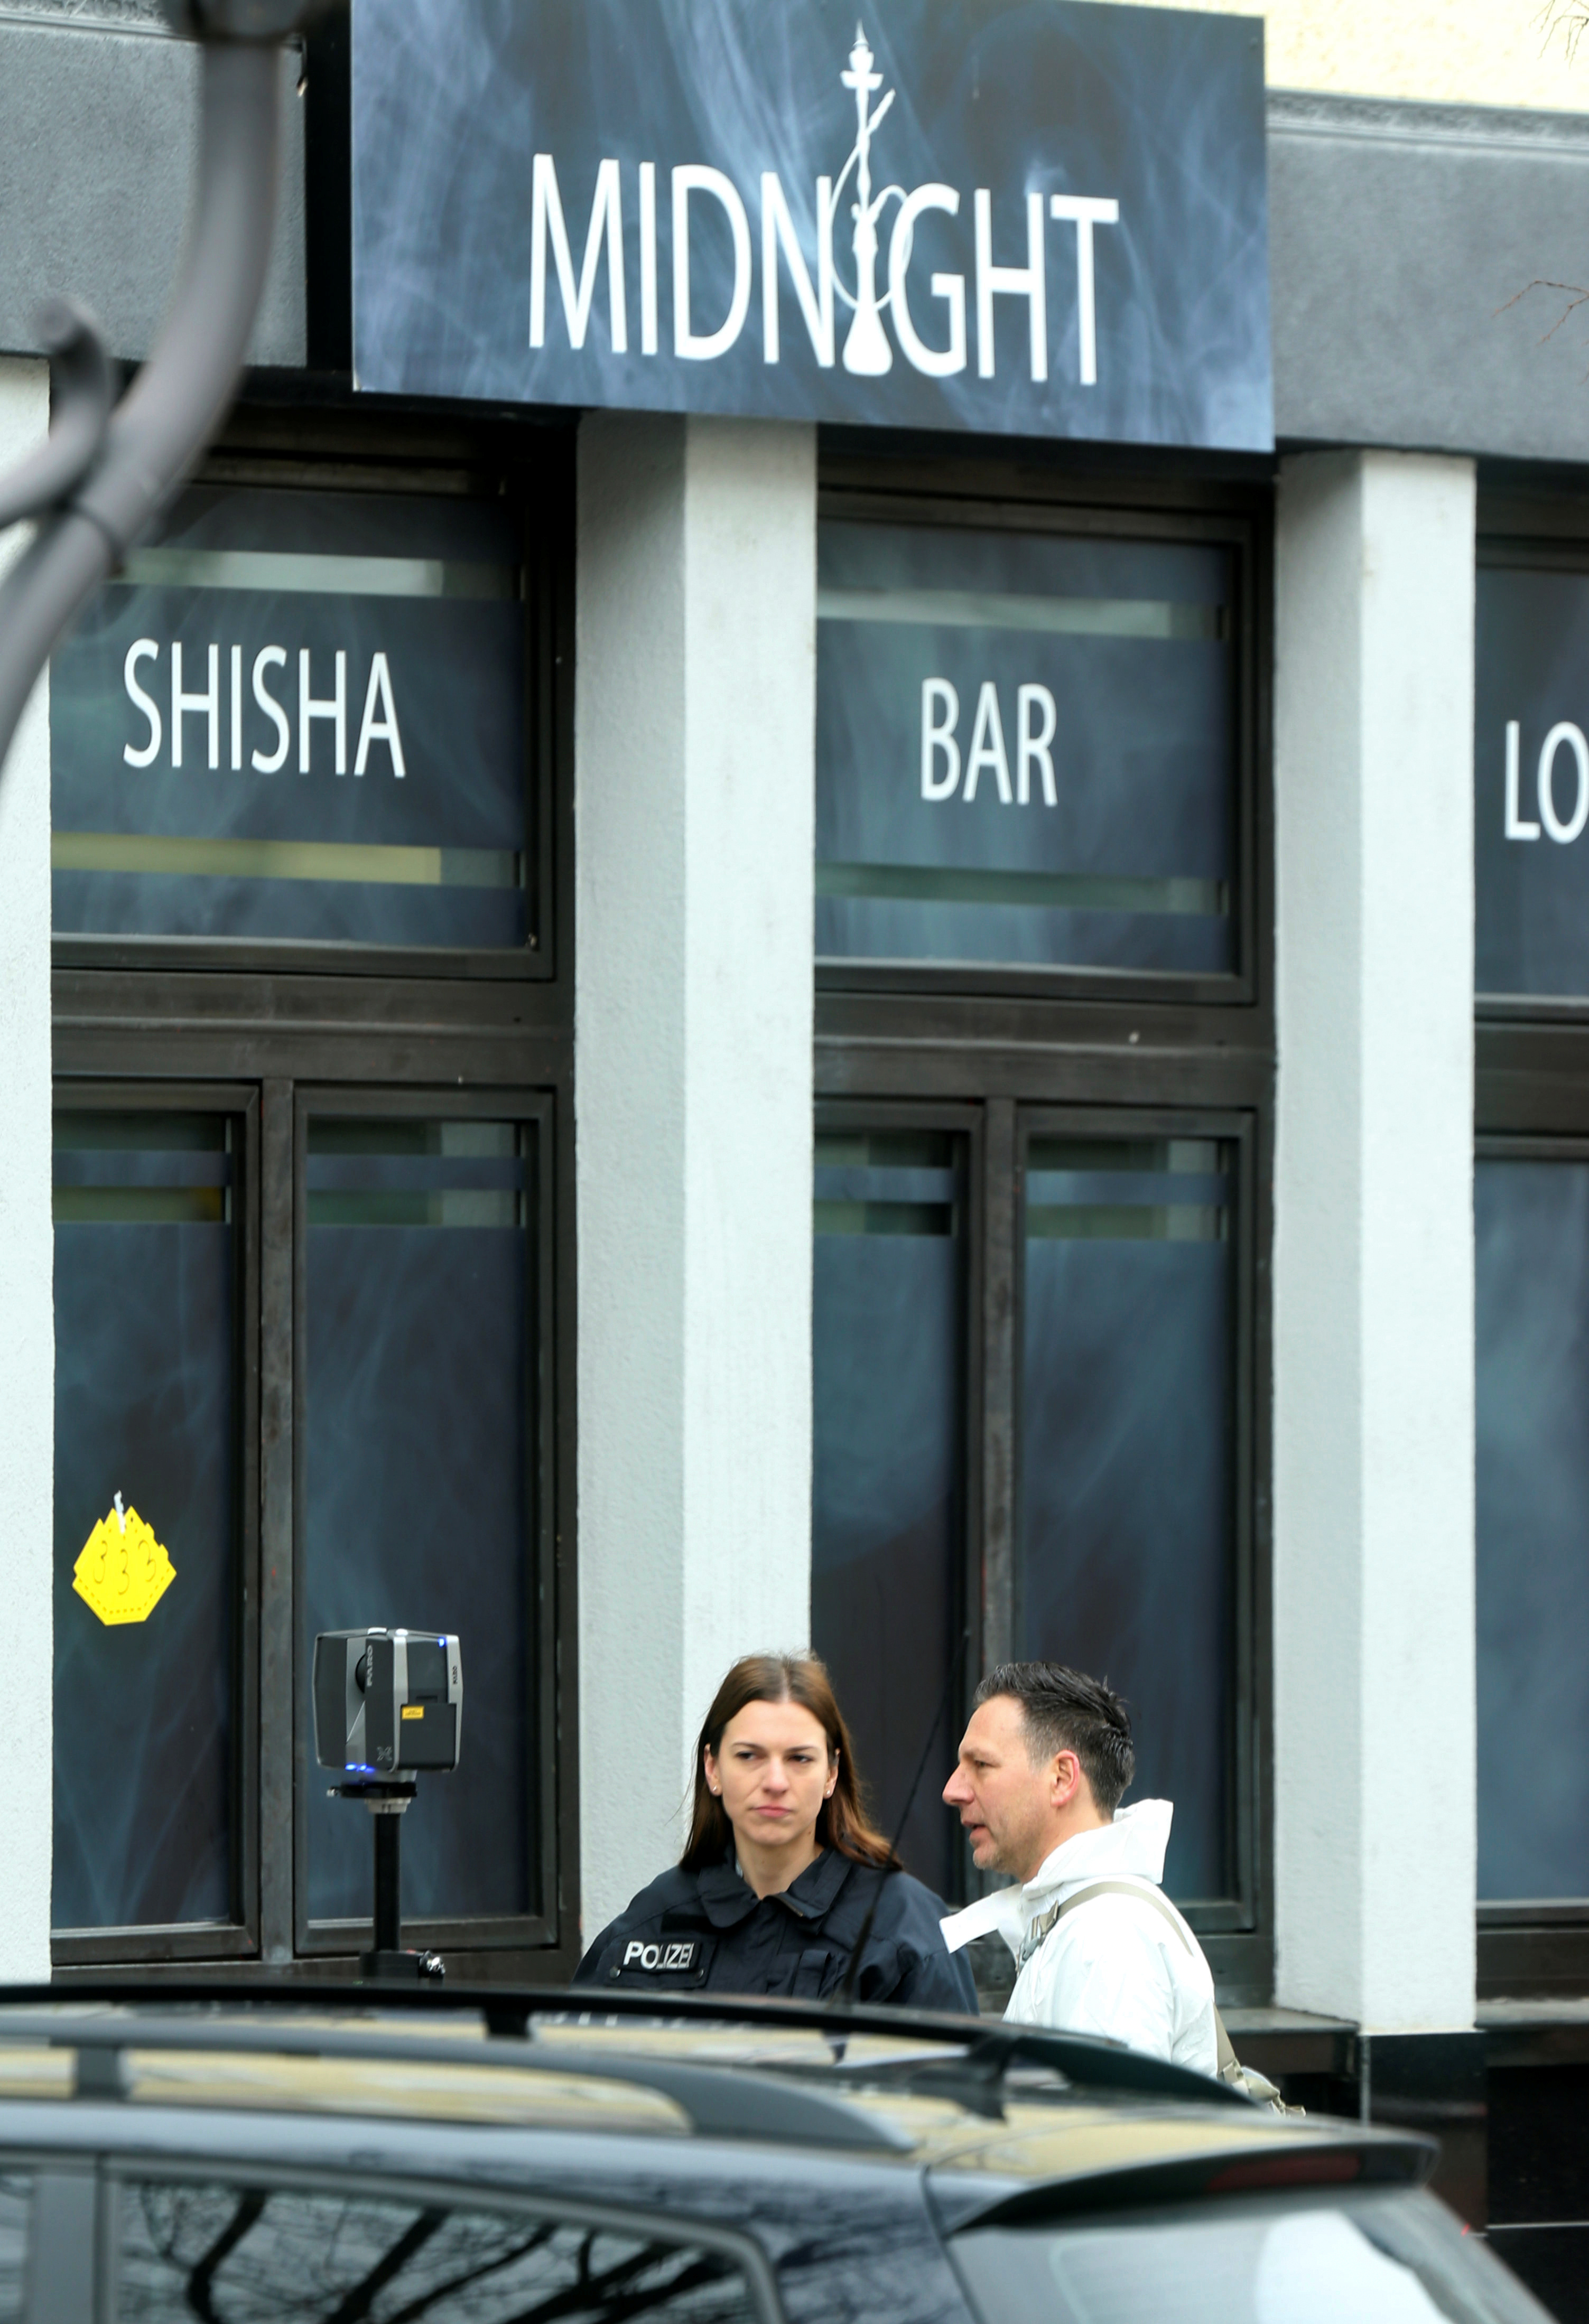  The horror unfolded about 10pm when the gunman stormed the Midnight Shisha bar nearby